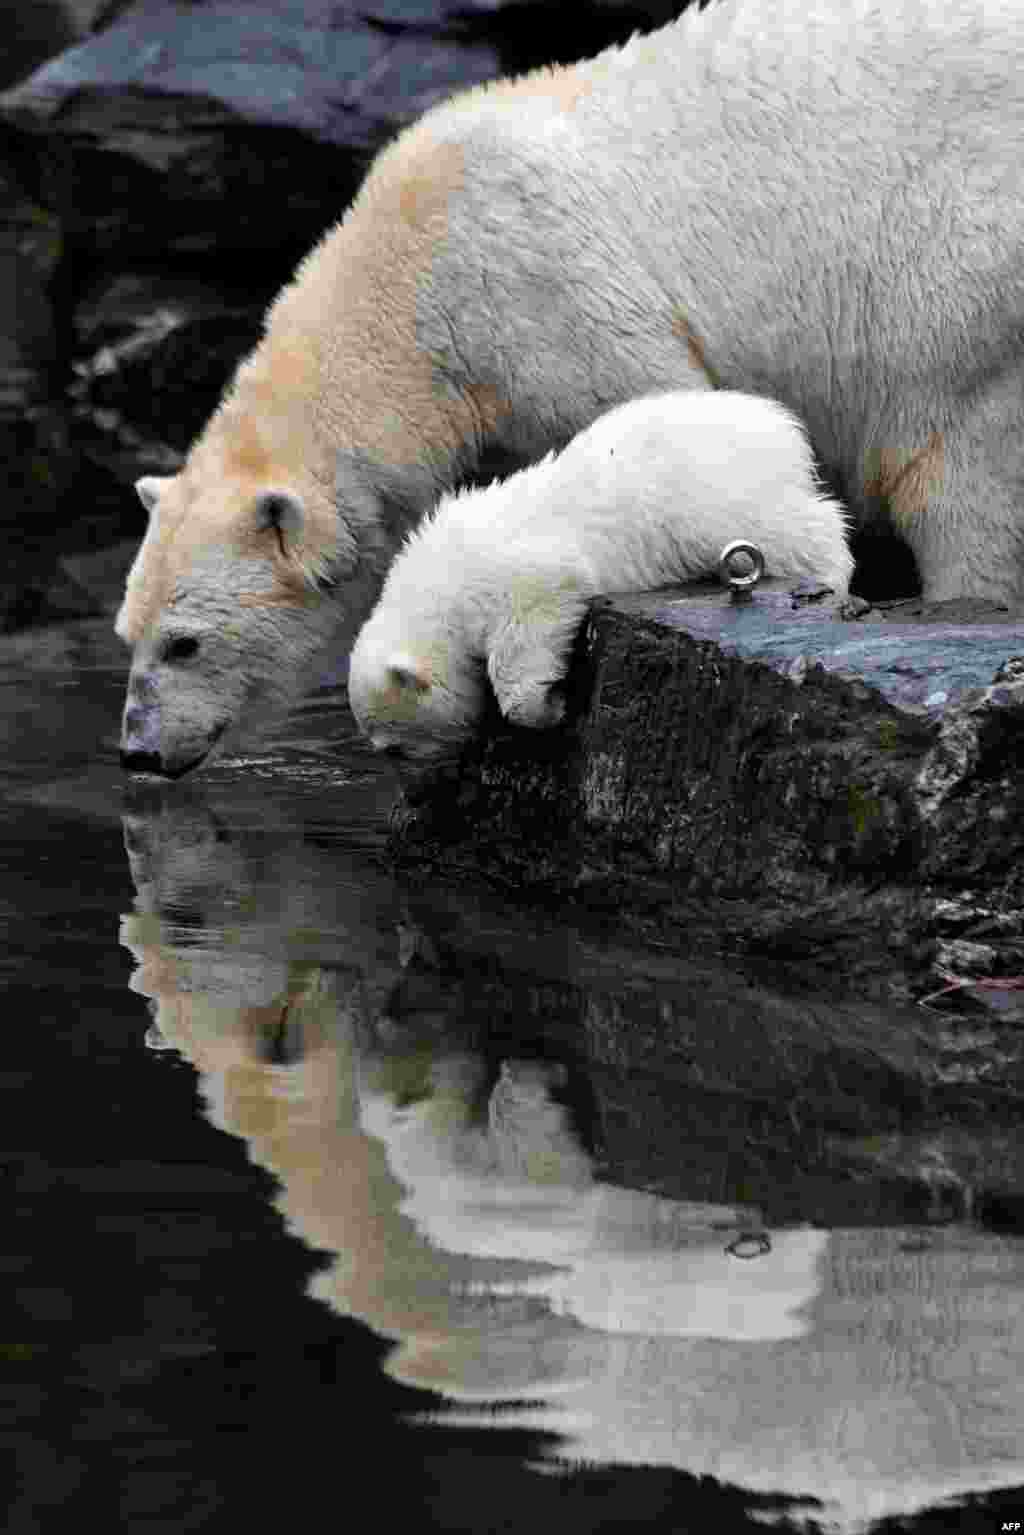 A baby polar bear and her mother Tonja are seen at their enclosure as the baby is presented to the press after leaving the breeding area for the first time at the Tierpark zoo in Berlin.